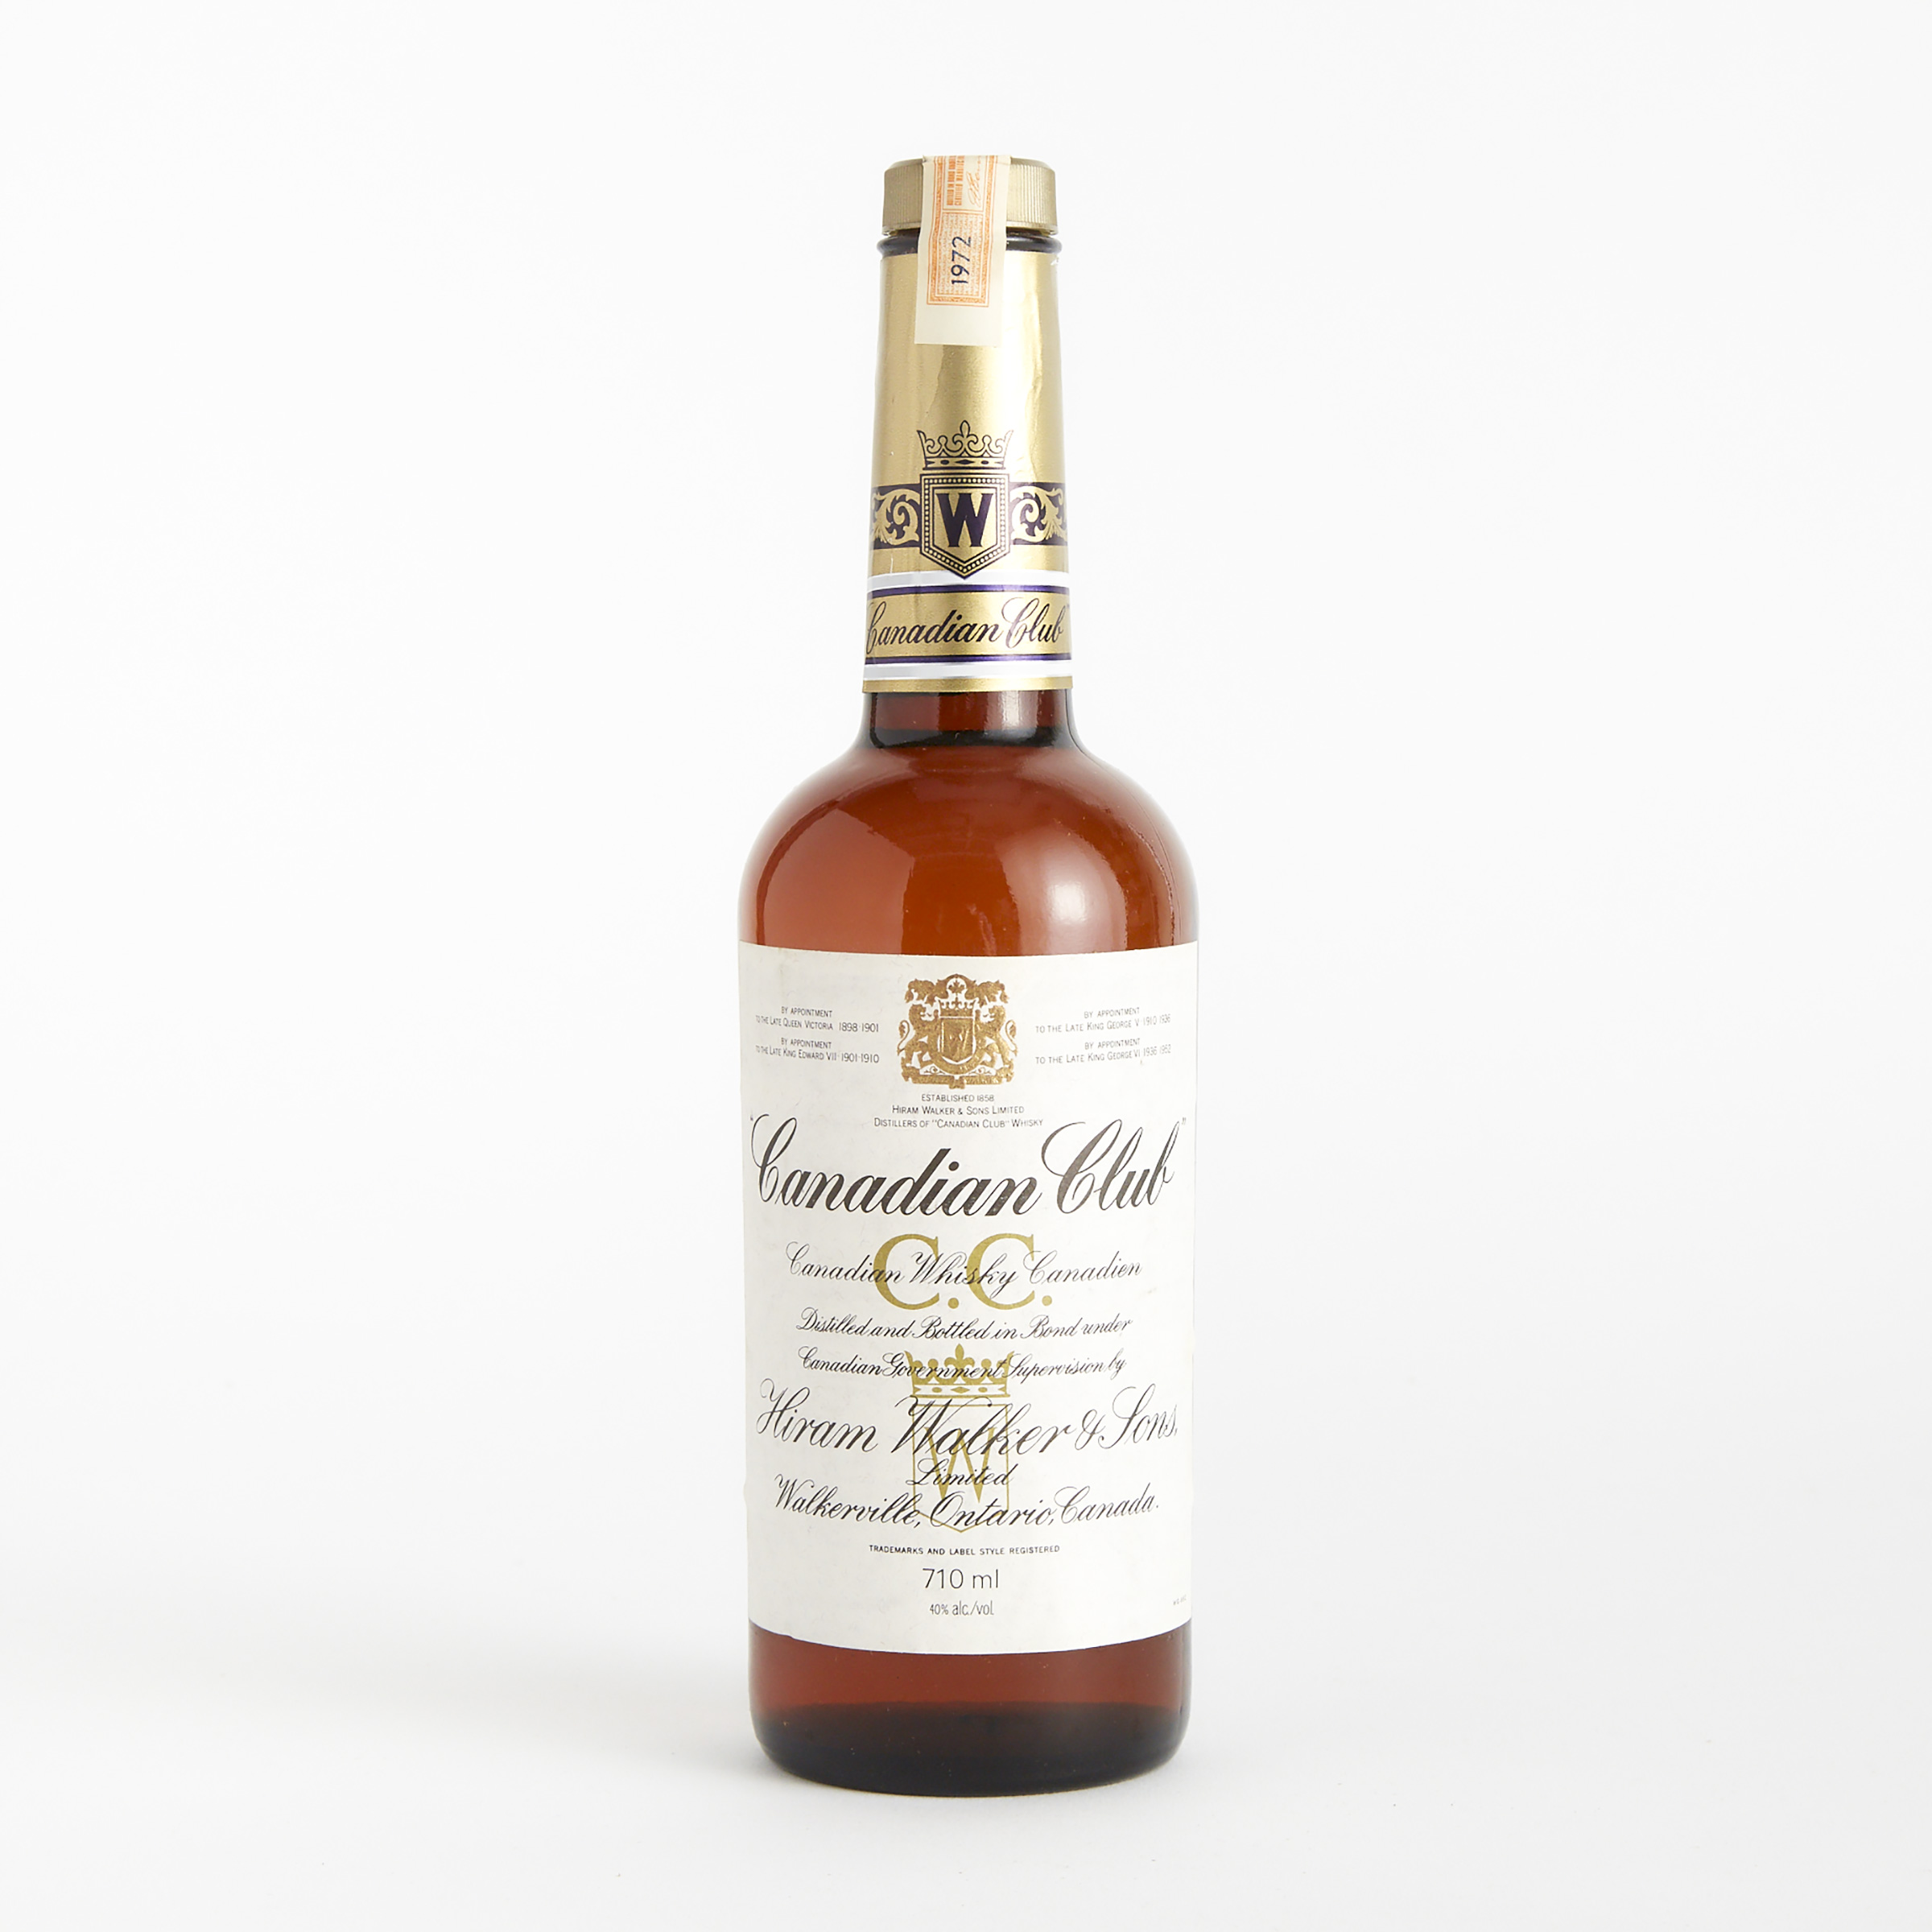 CANADIAN CLUB CANADIAN WHISKY NAS (ONE 710 ML)